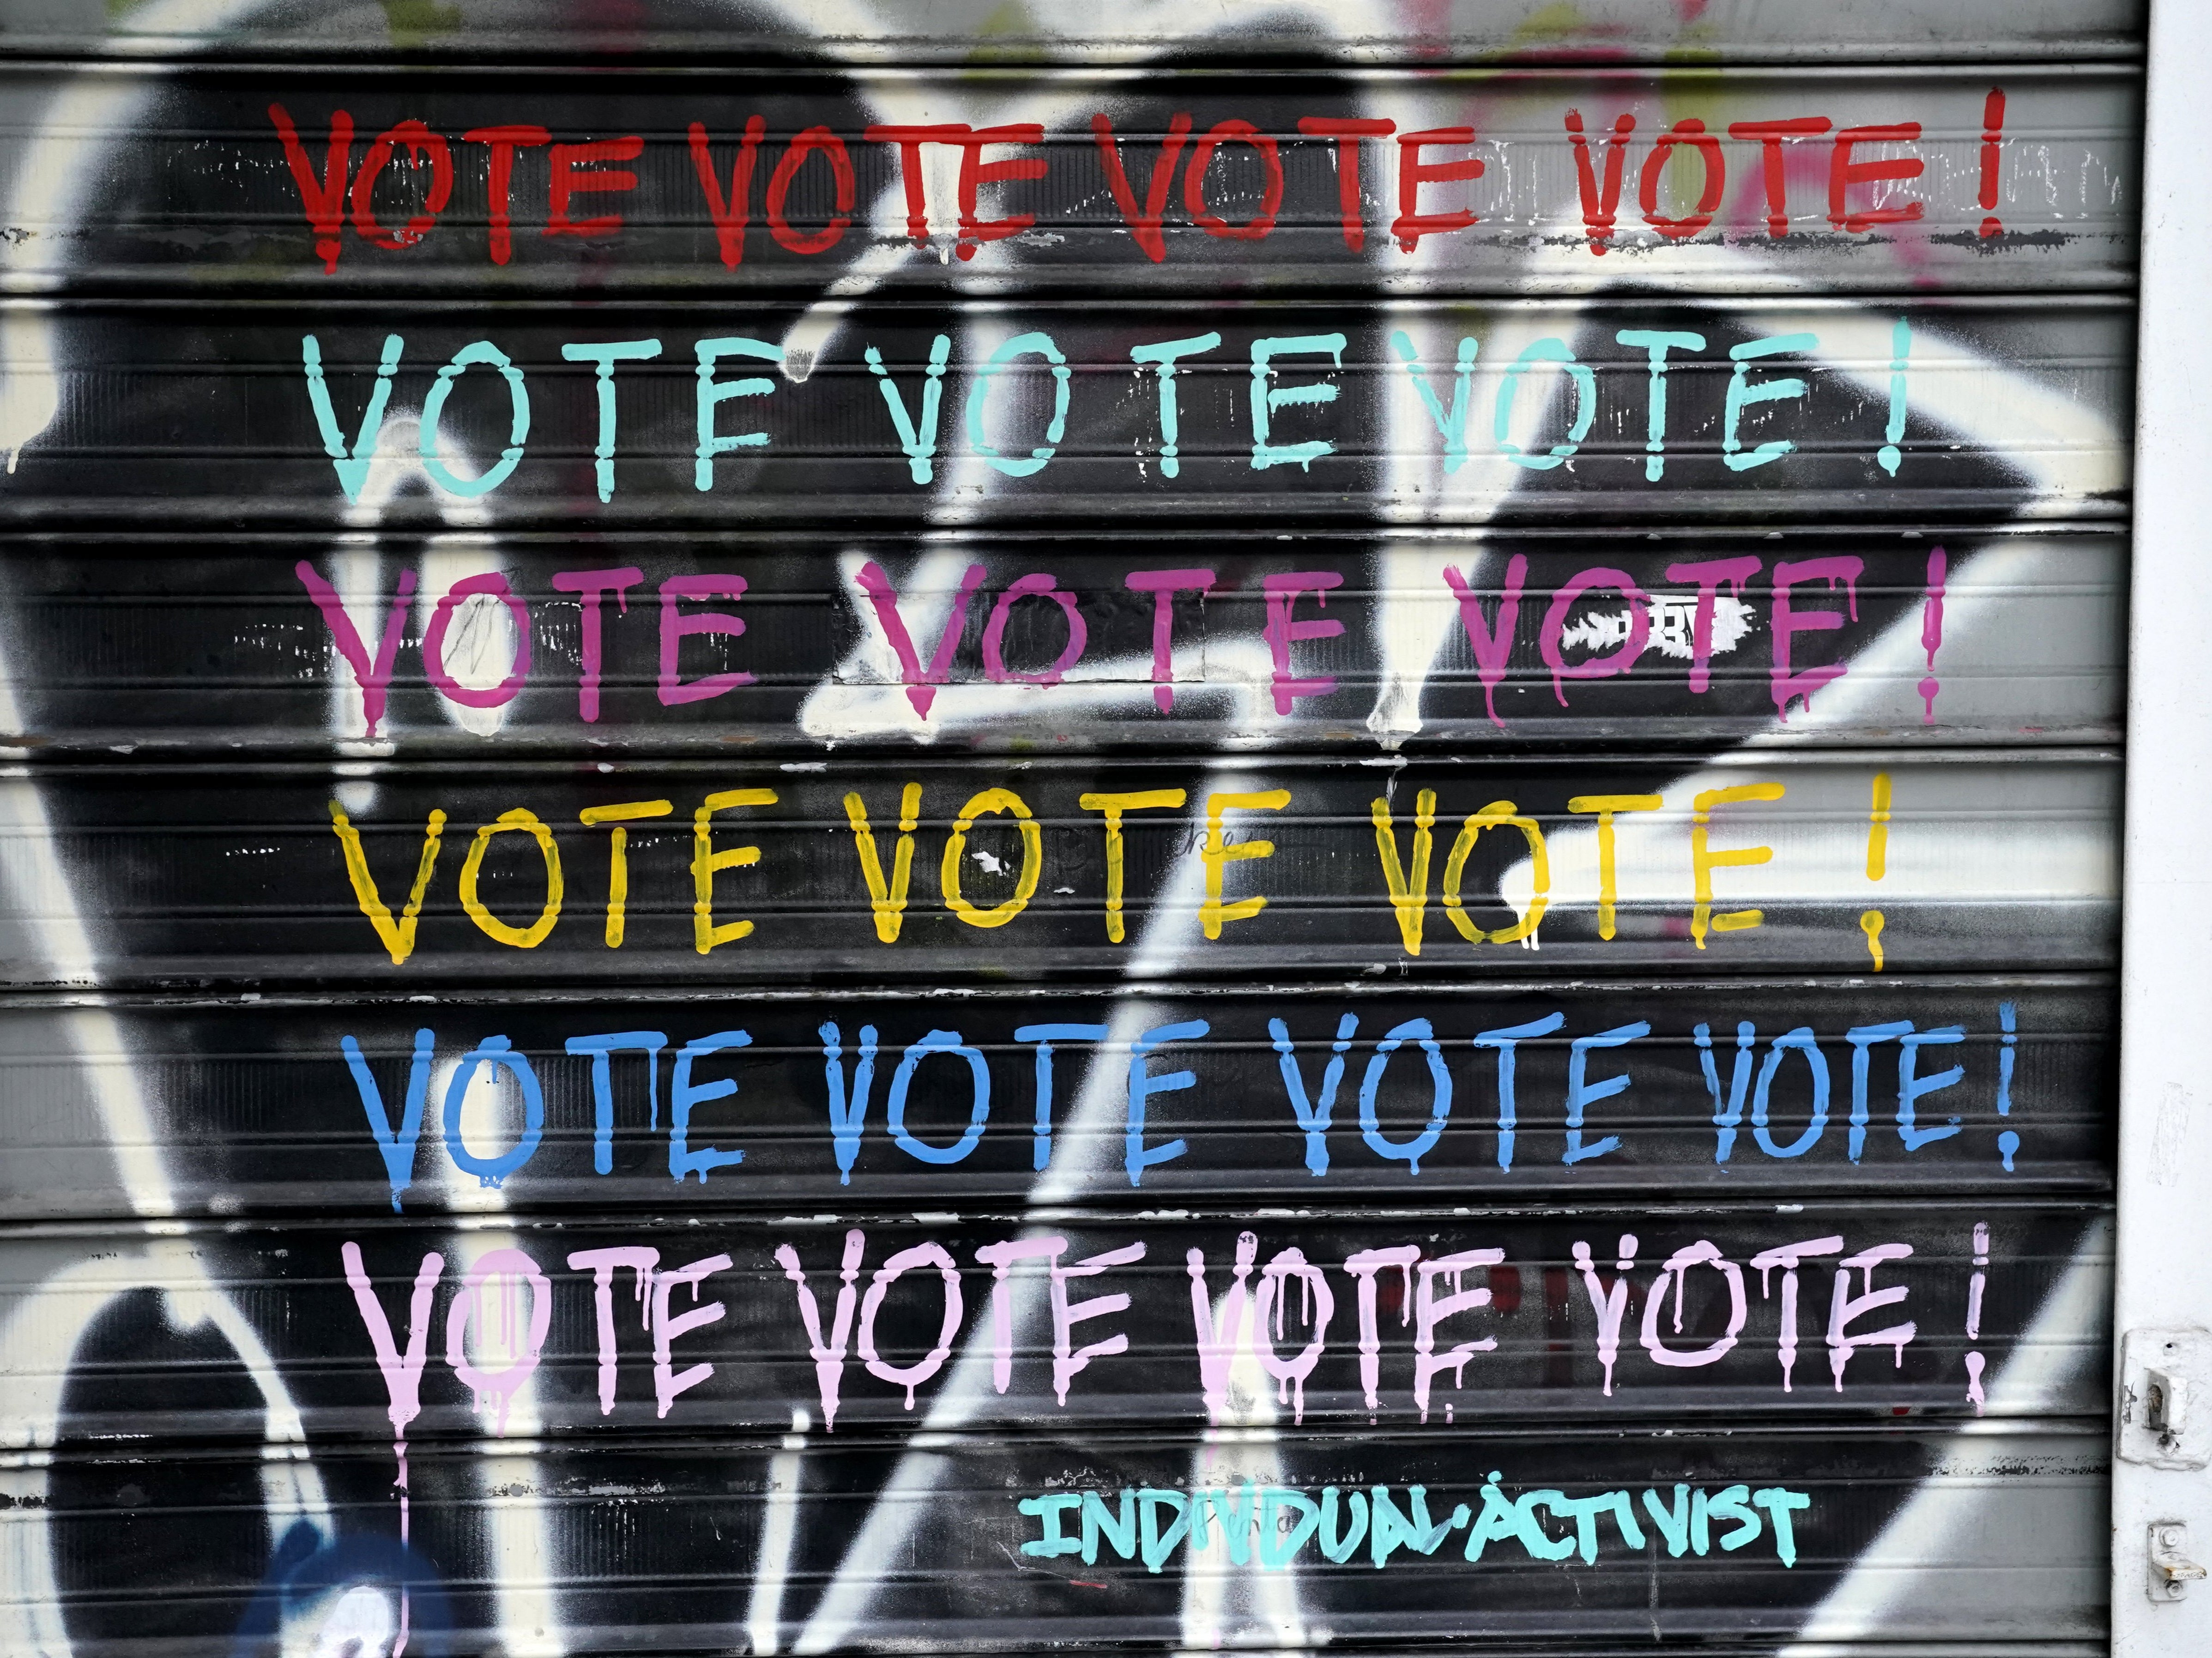 A vote mural on a store front grate is seen on Houston Street in New York City on 20 October 2020